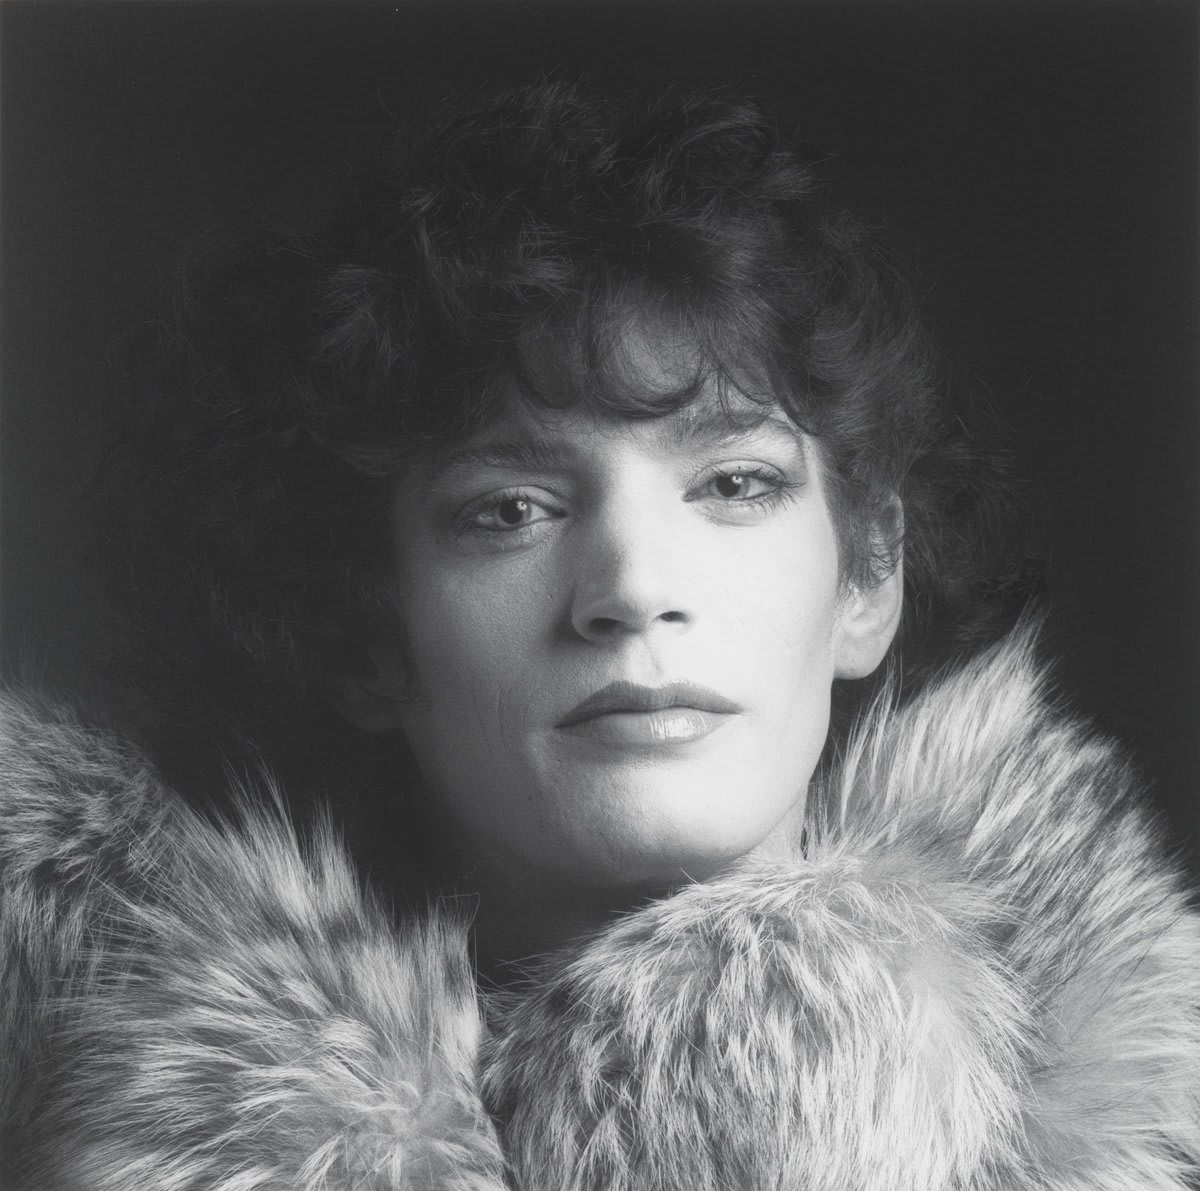 It has often been said that Robert Mapplethorpe was his own favorite subject. The artist photographed himself consistently throughout his life, from his earliest experiments with a Polaroid camera to the formal self-portraits he created in his studio shortly before his death.